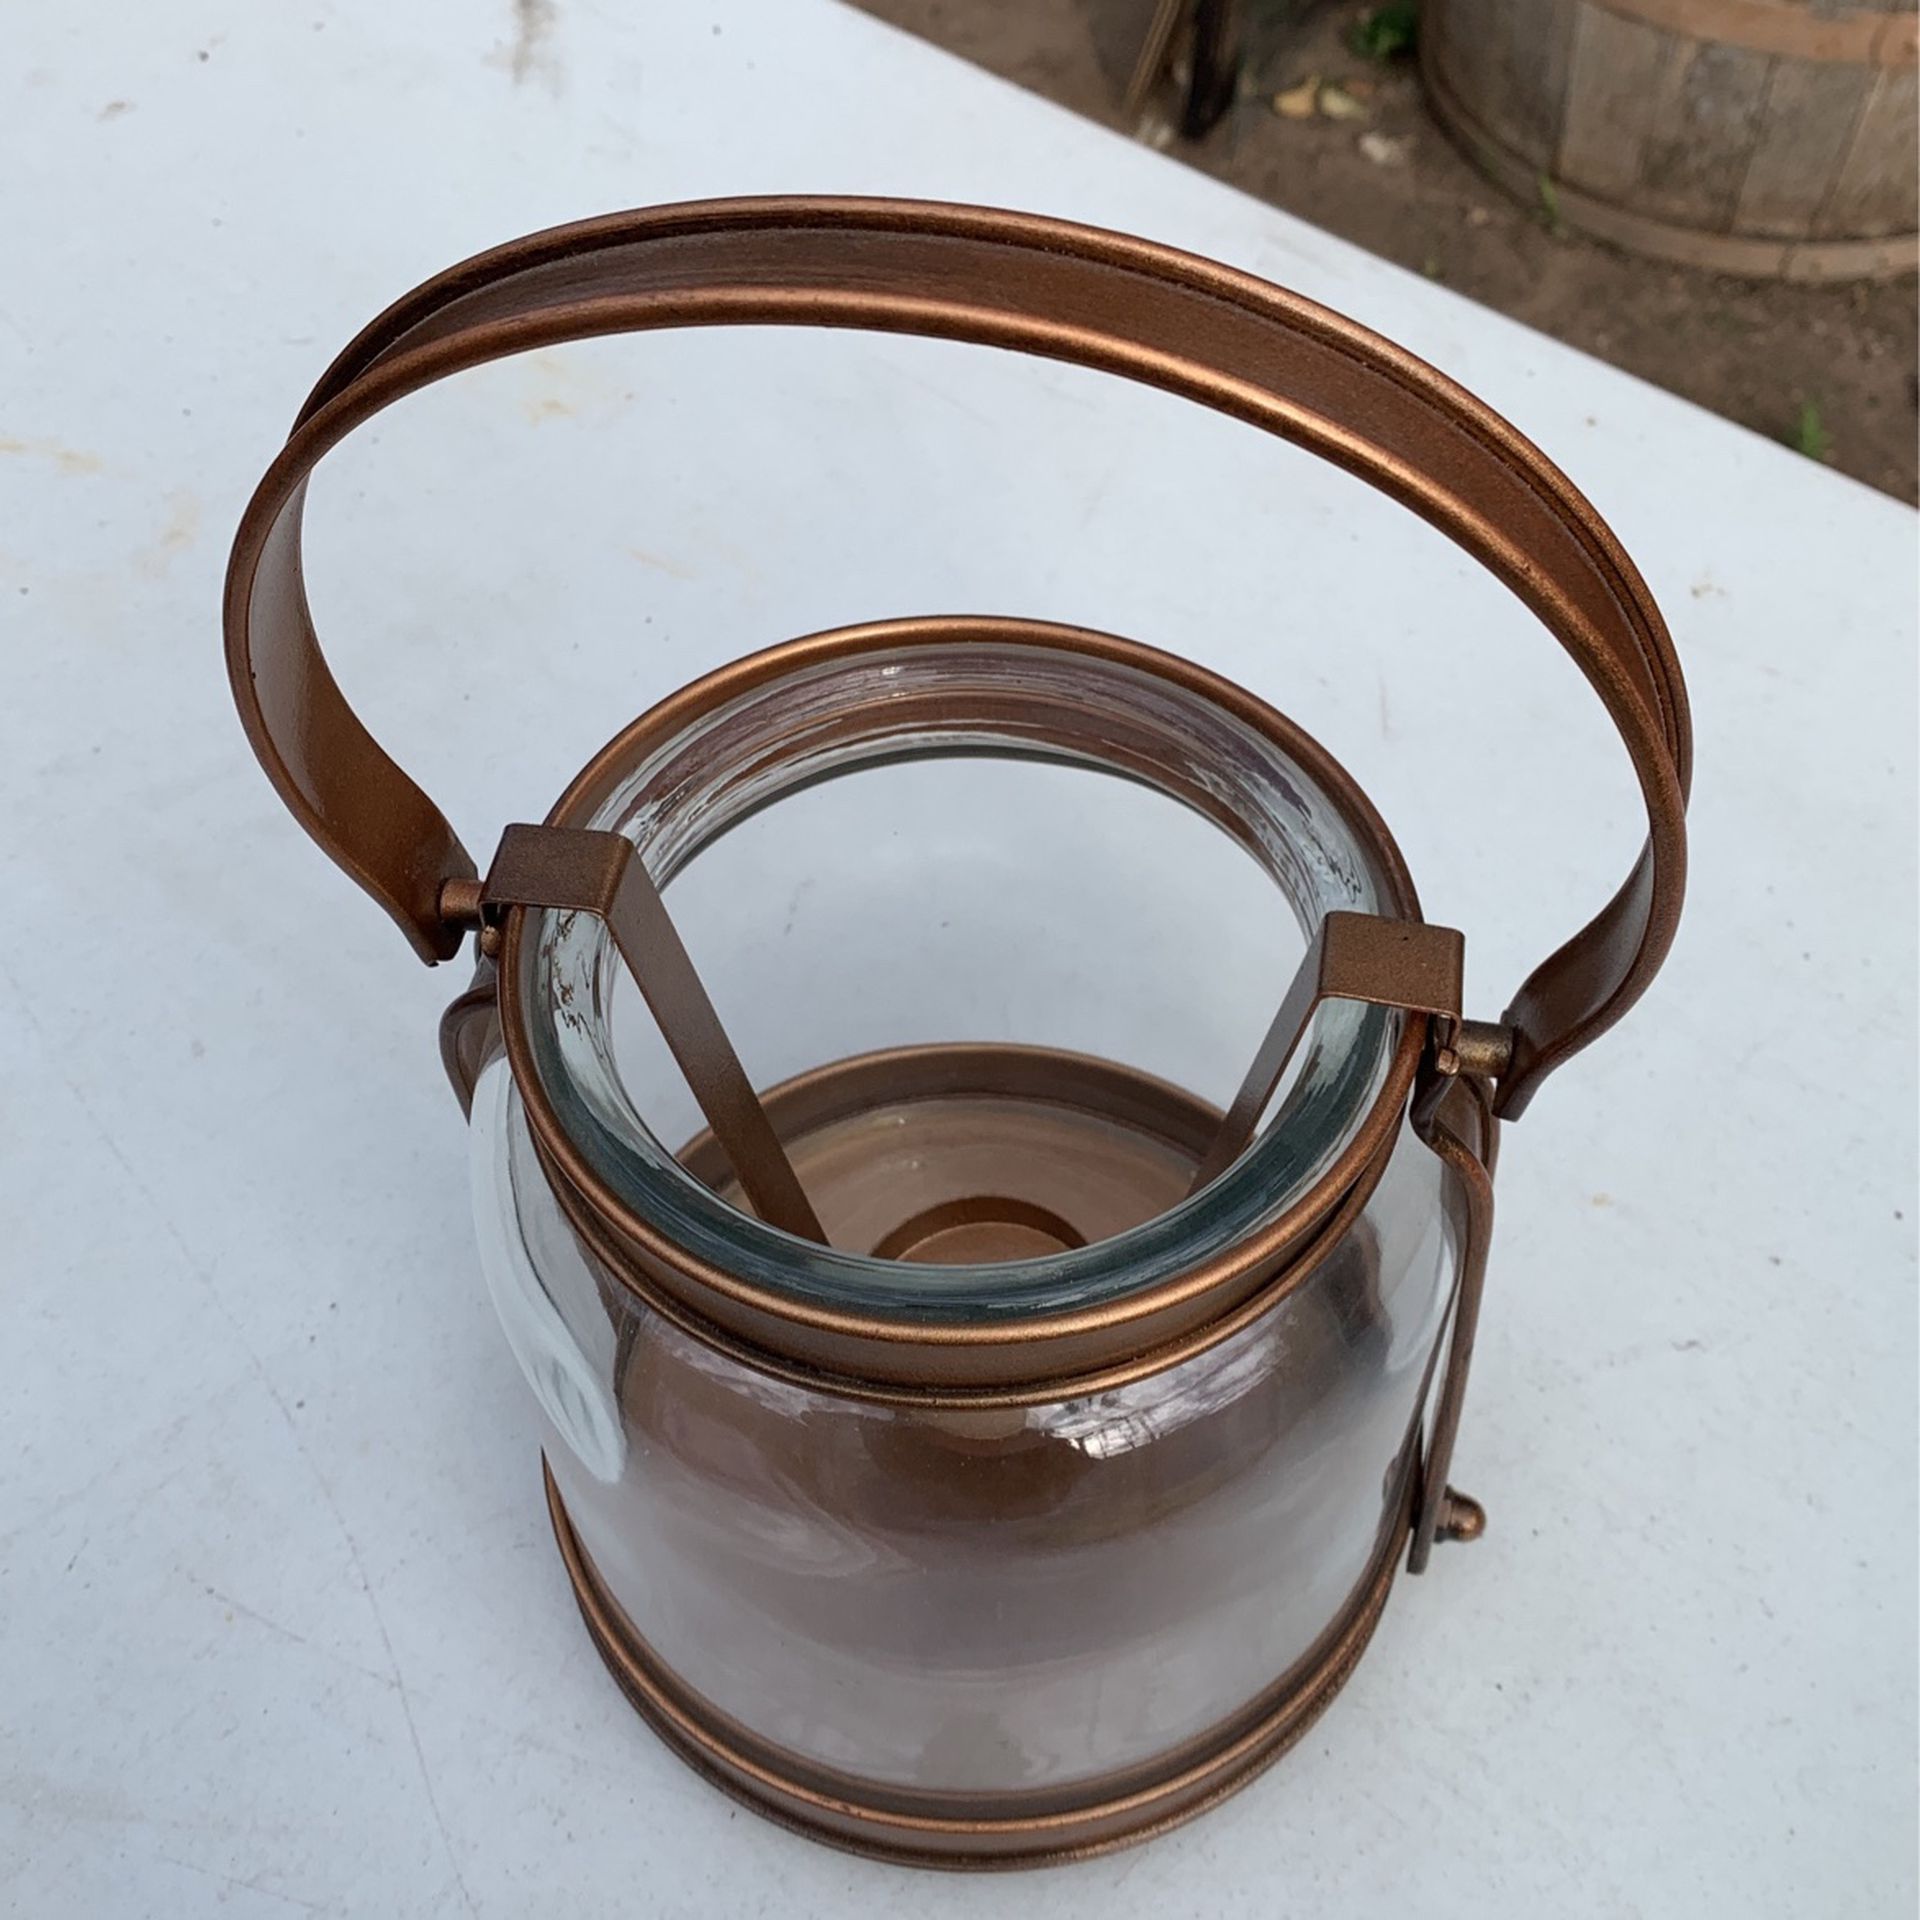 Candle Holder, Can be use as plant Pot